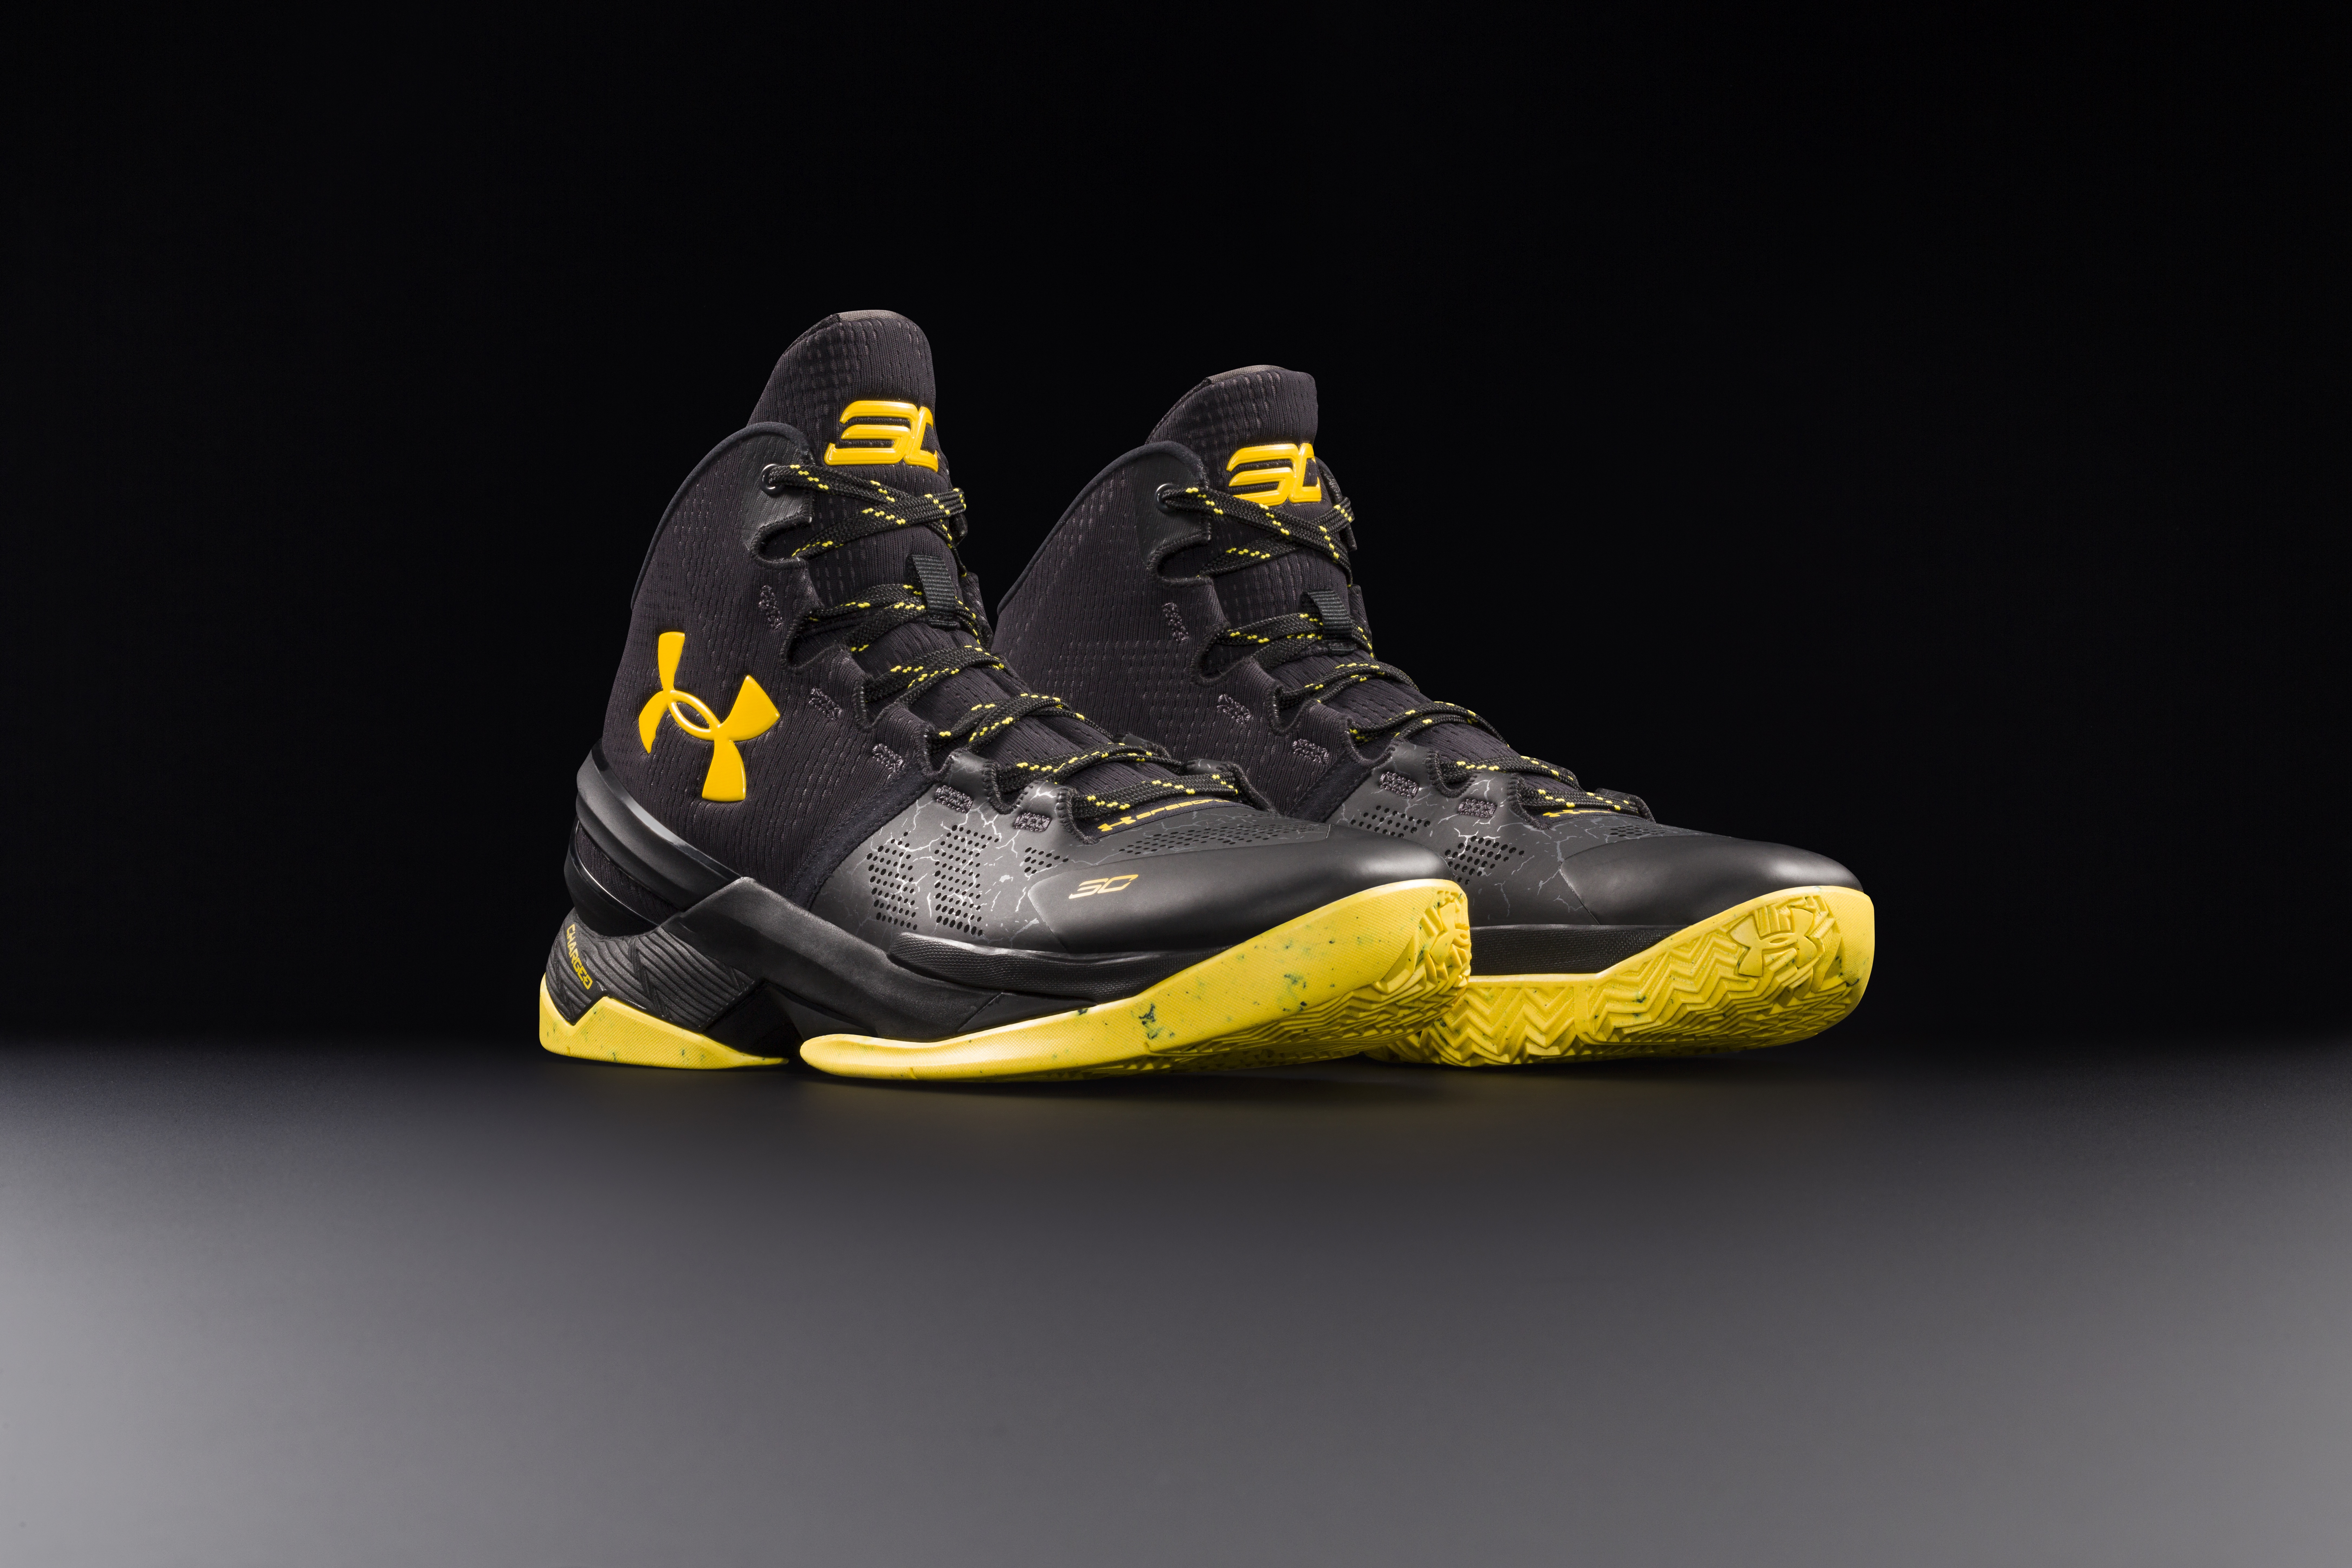 under armour stephen curry black